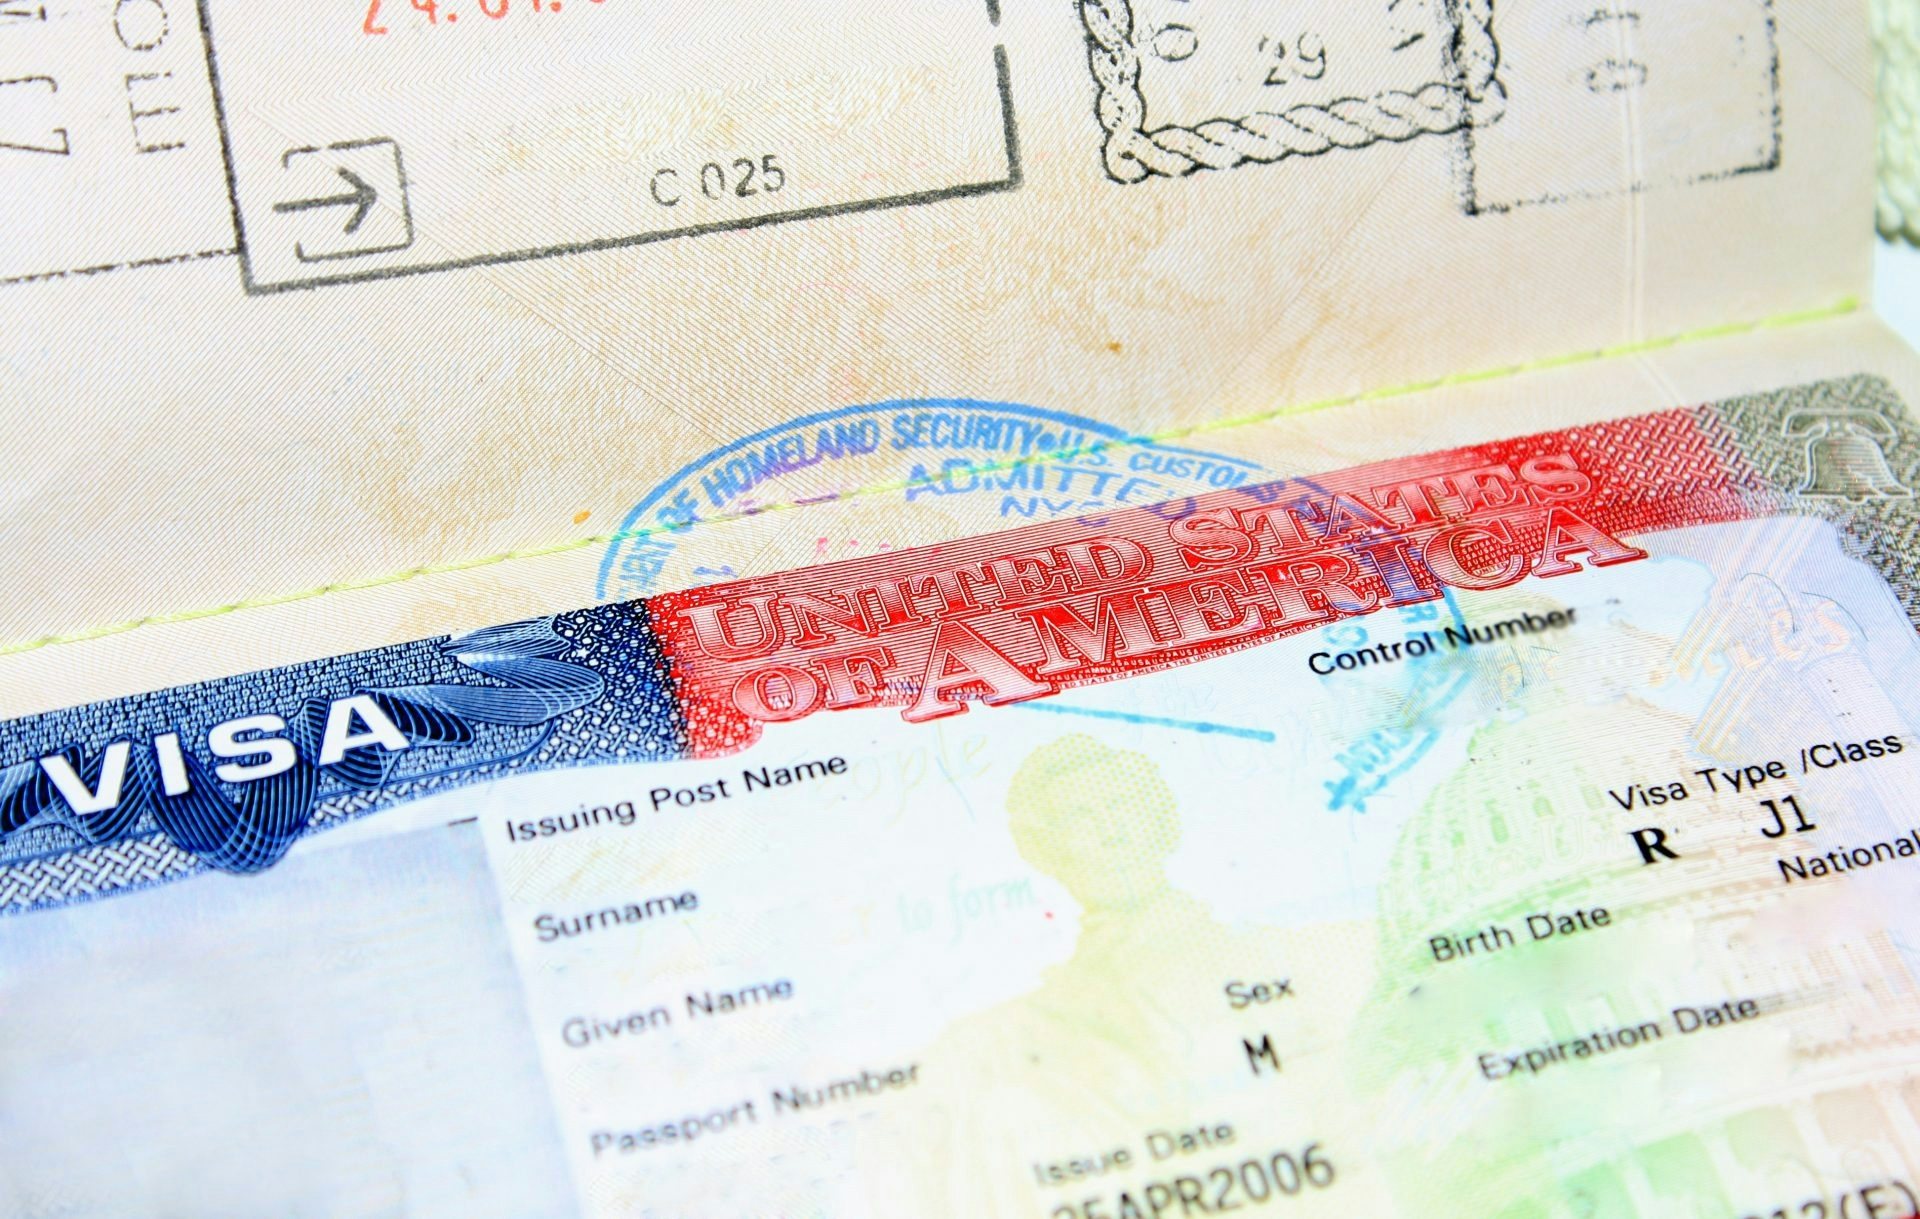 Chinese tourists will be asked to provide their social media account names when applying for U.S. visas. (Shutterstock)